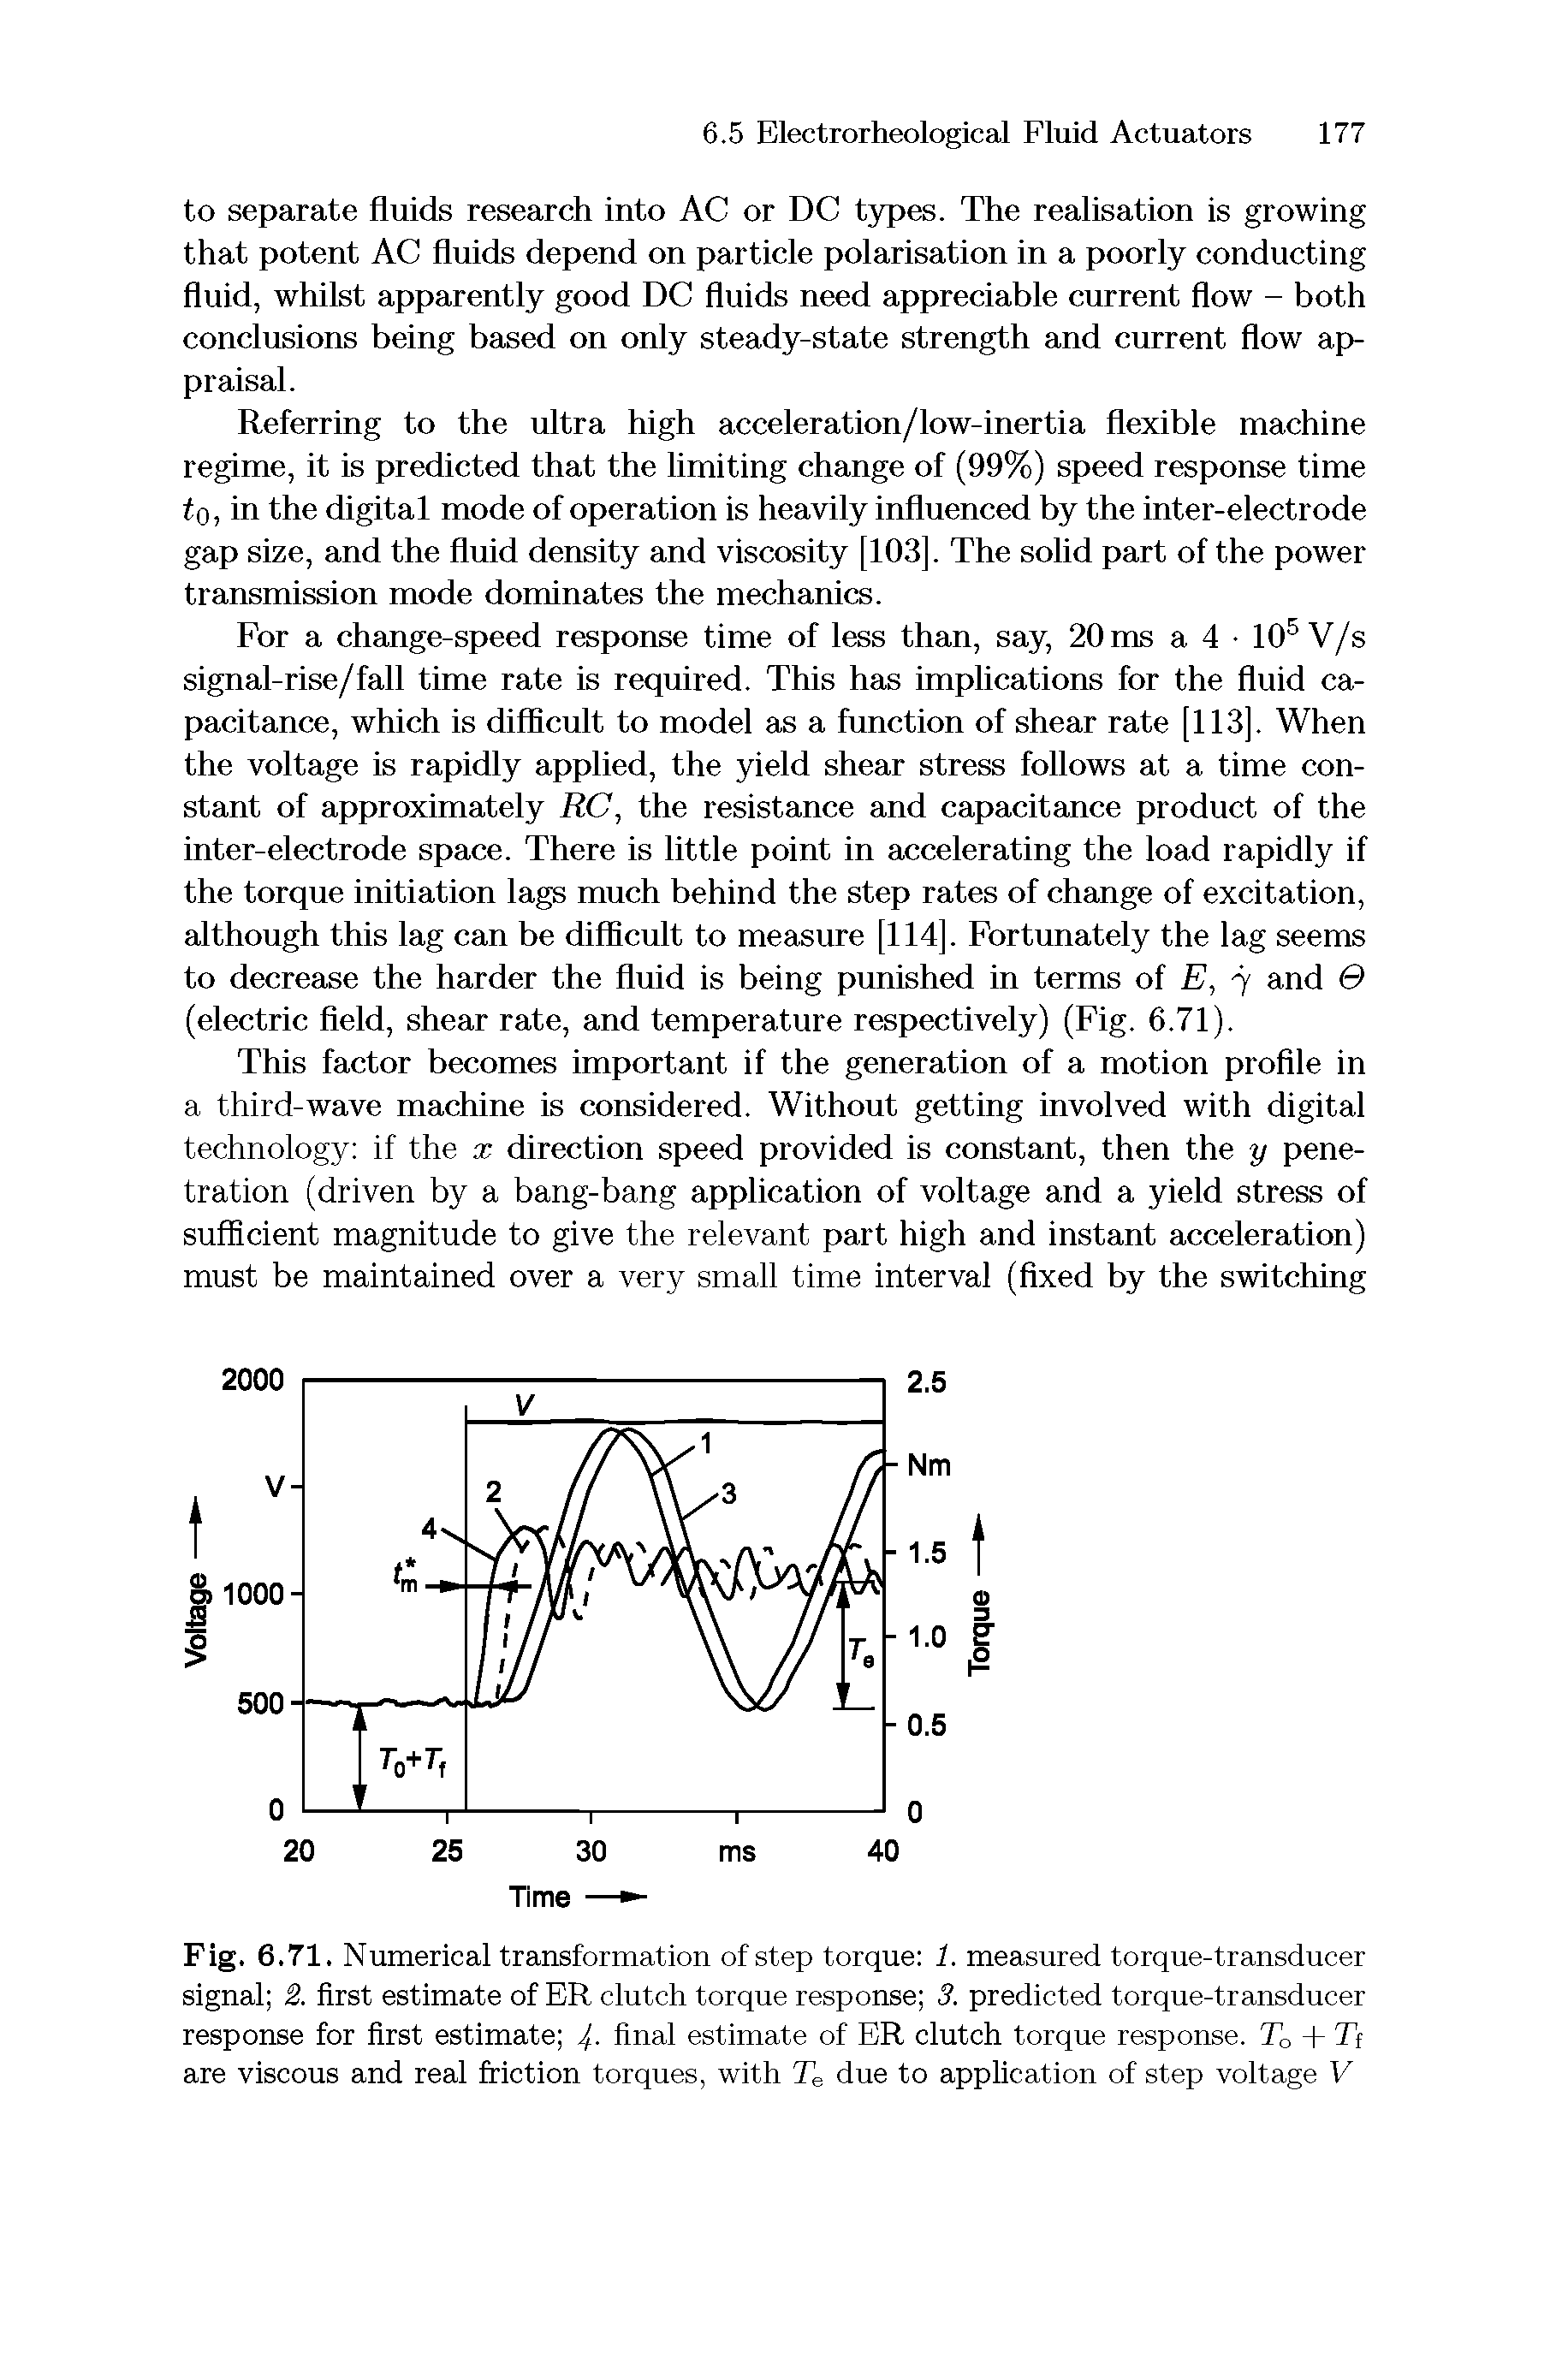 Fig. 6.71. Numerical transformation of step torque 1. measured torque-transducer signal 2. first estimate of ER clutch torque response 3. predicted torque-transducer response for first estimate 4. final estimate of ER clutch torque response. To + Tf are viscous and real friction torques, with Te due to application of step voltage V...